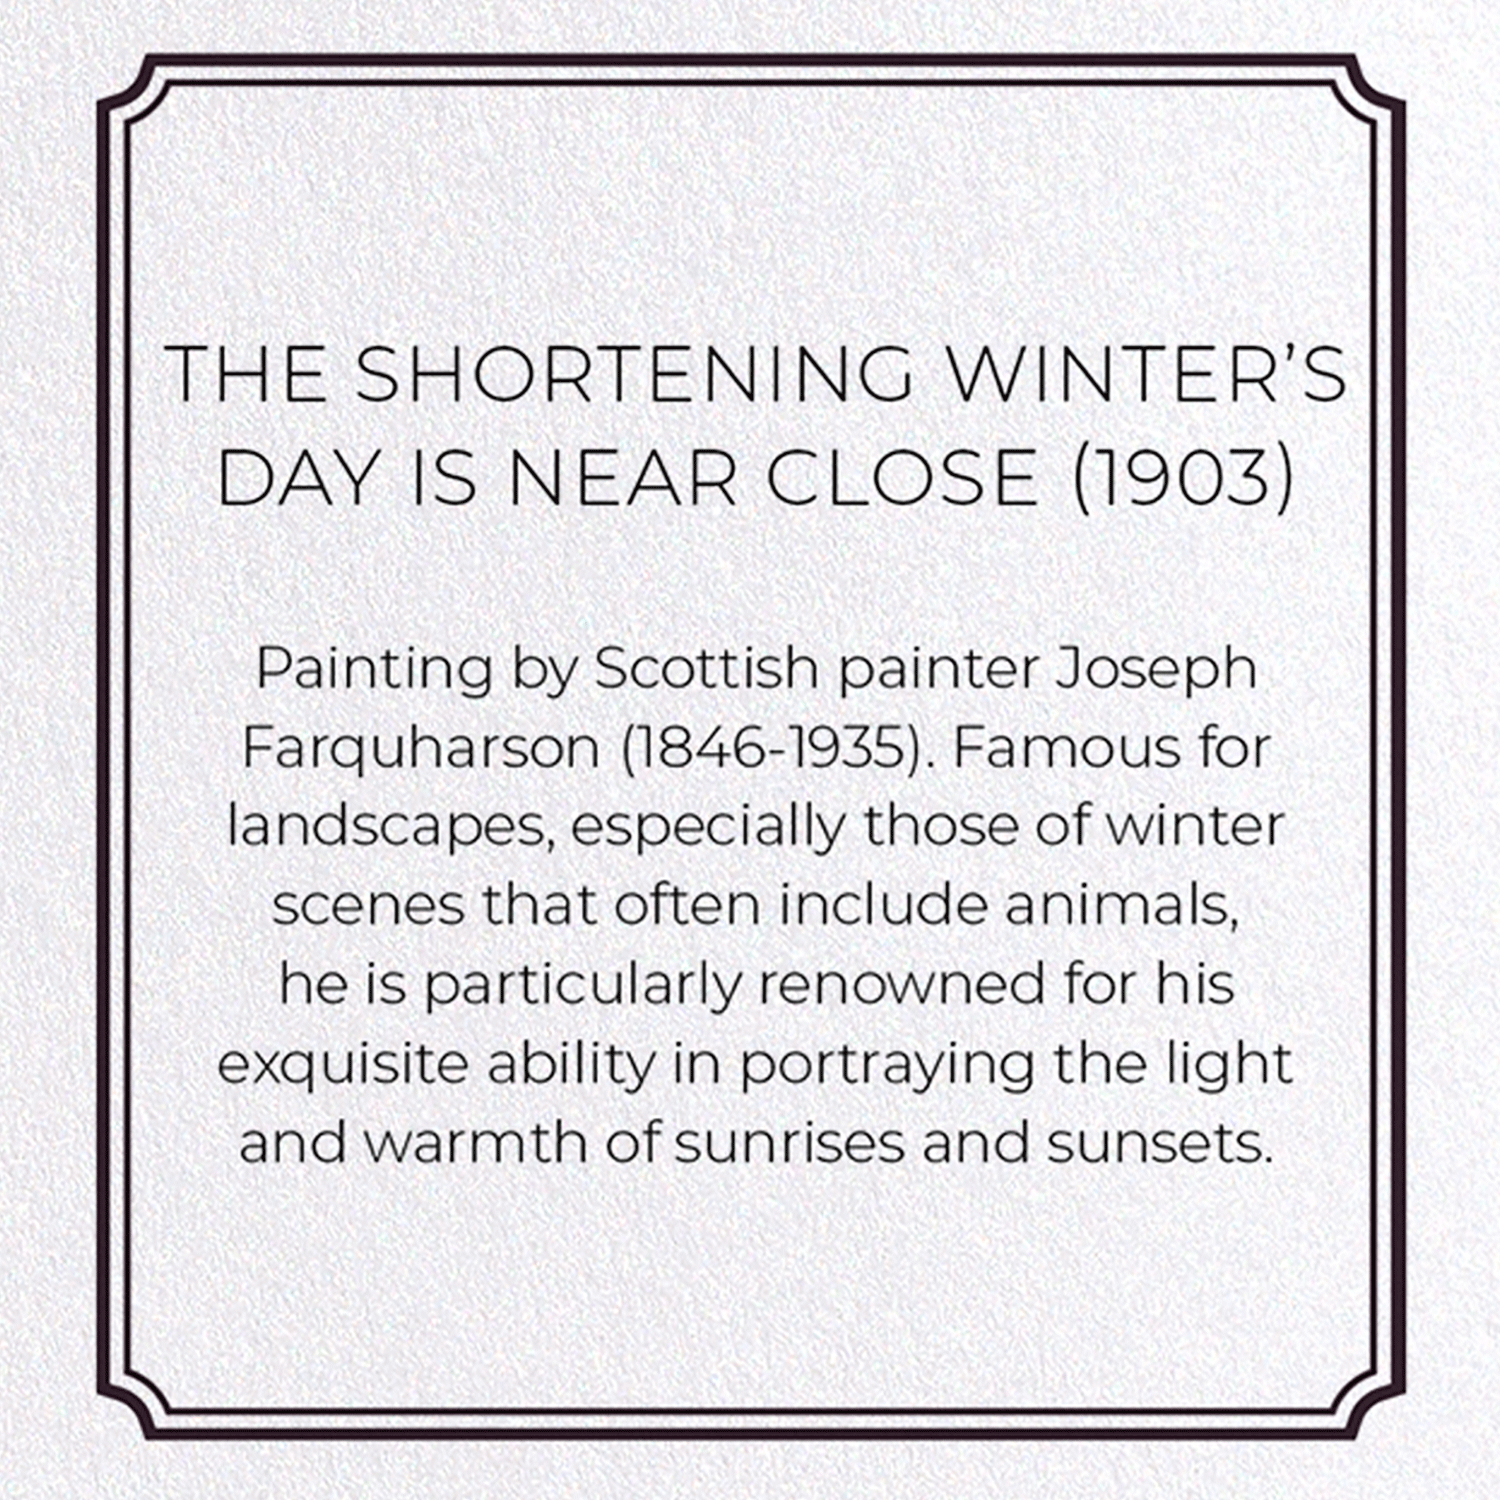 THE SHORTENING WINTER’S DAY IS NEAR CLOSE (1903)